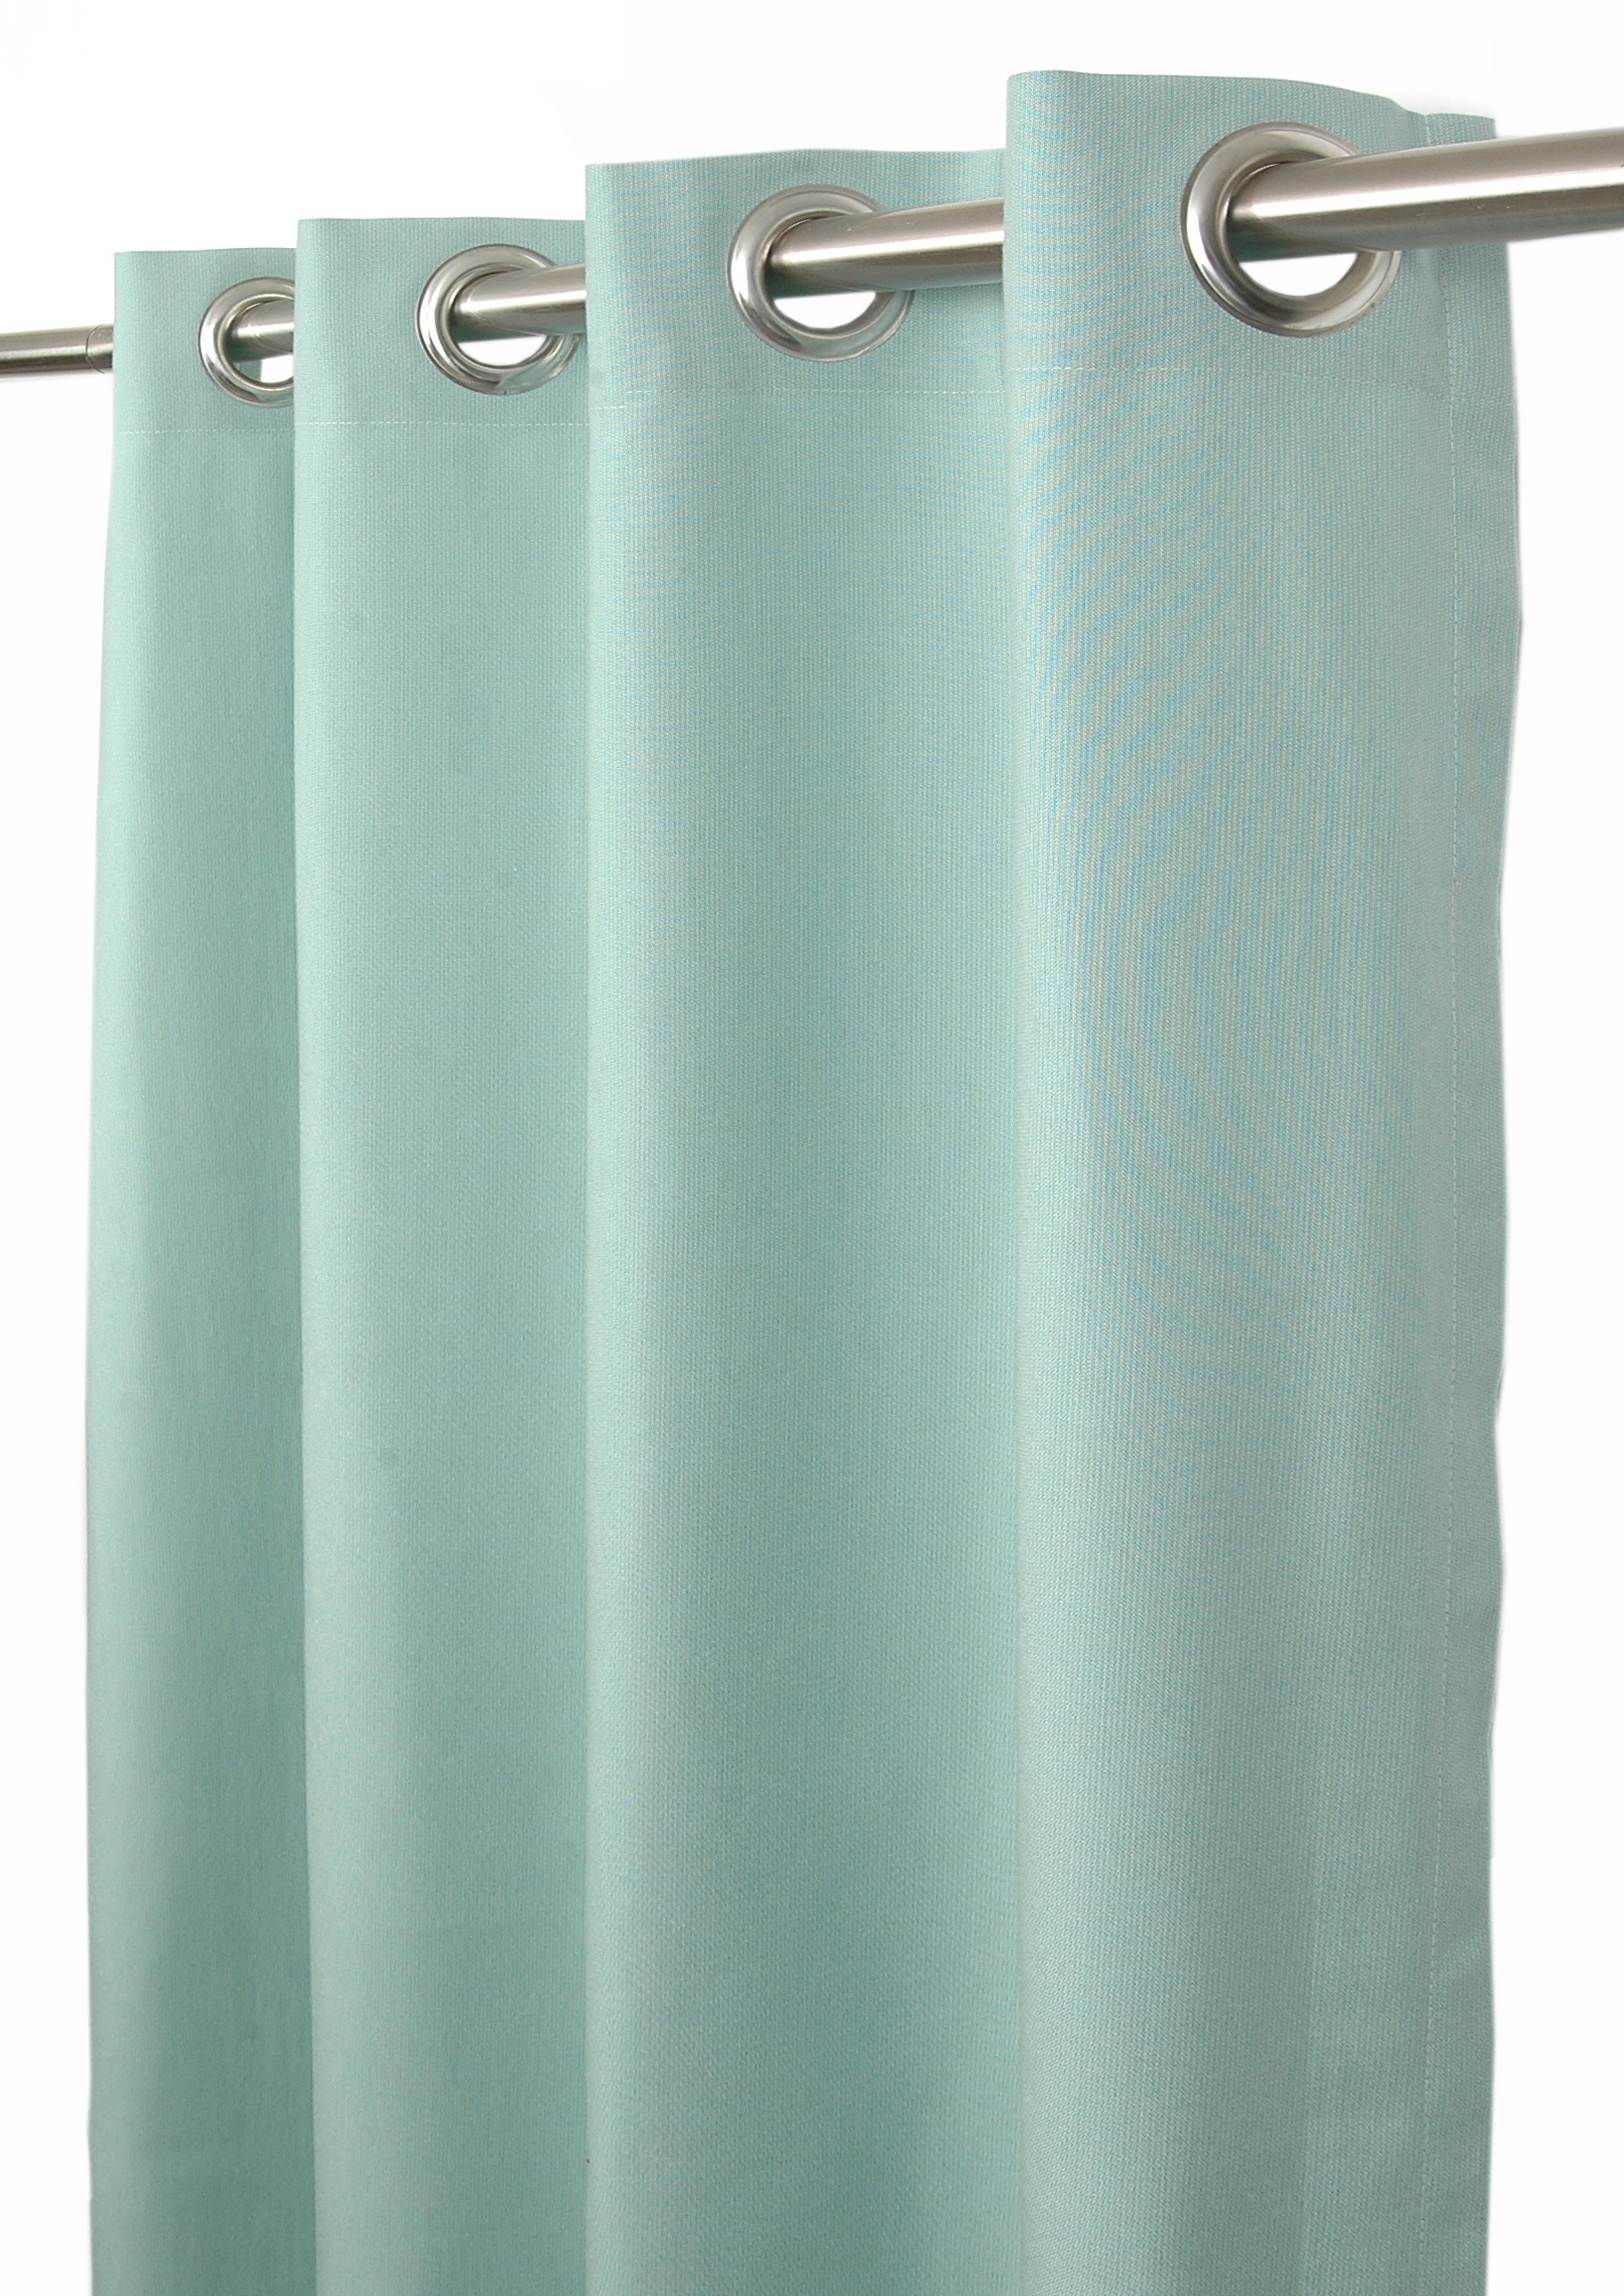 Sunbrella Spectrum Mist Indoor/Outdoor Curtain Panel by Sweet Summer Living, 50" x 84" with Stainless Steel Grommets - image 1 of 1